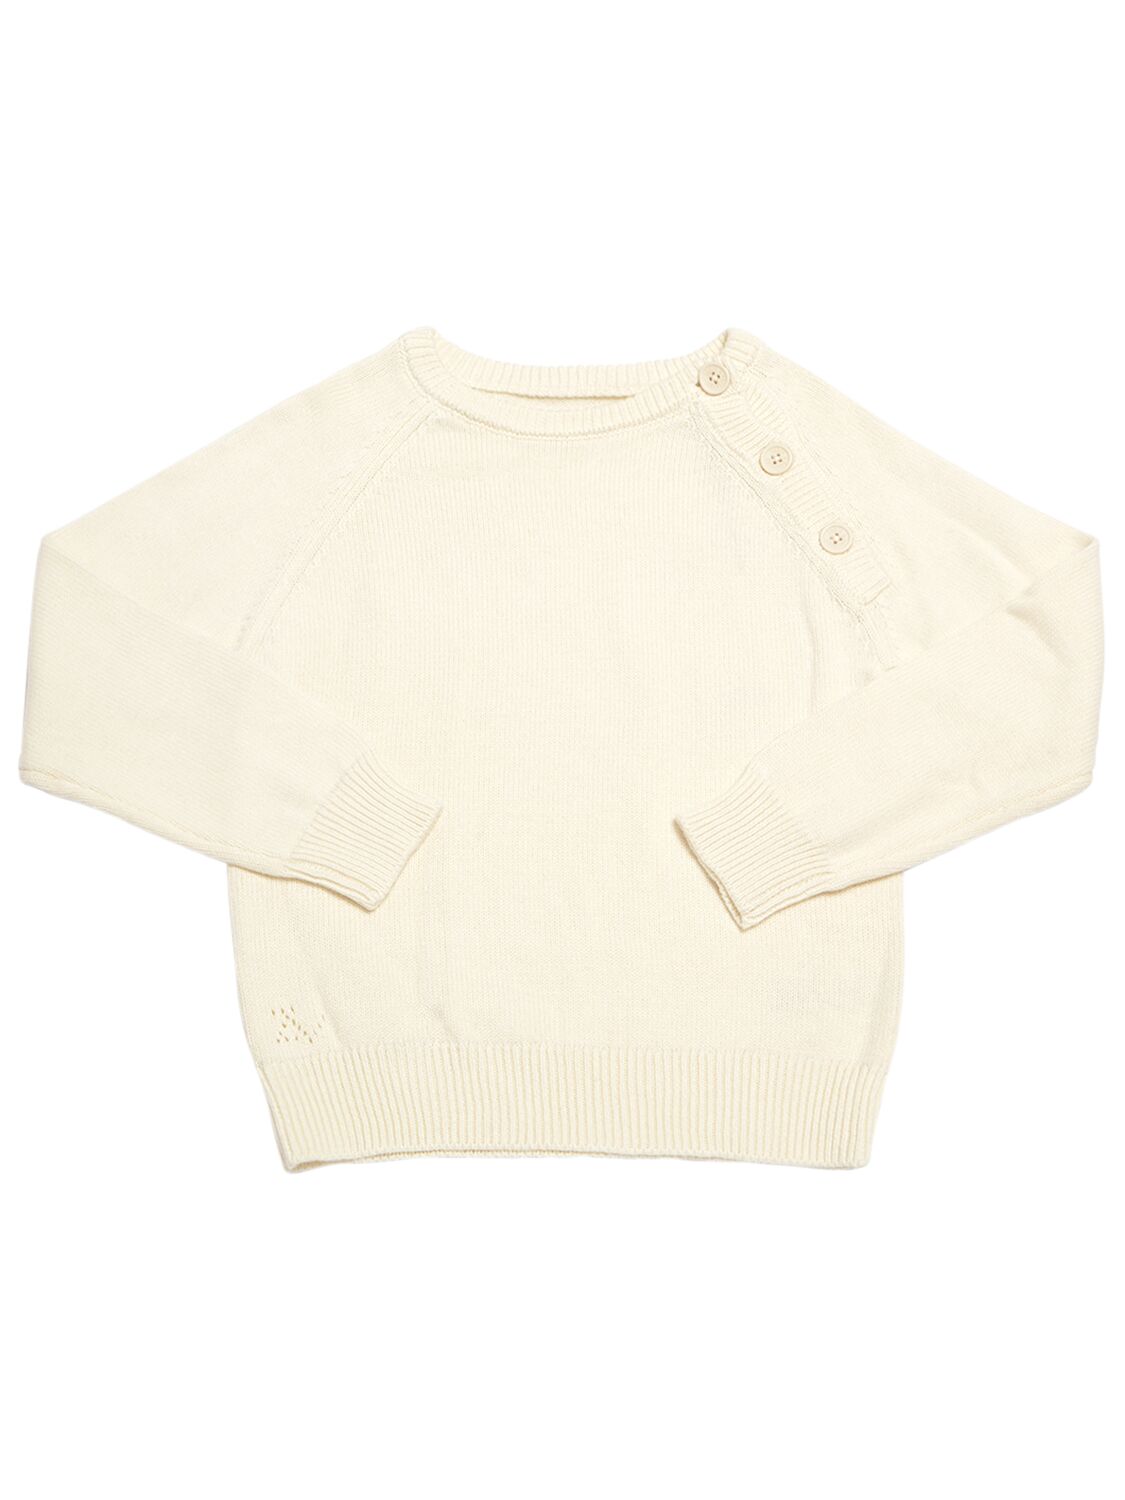 Zadig & Voltaire Kids' Embellished Cotton Knit Sweater In Off-white